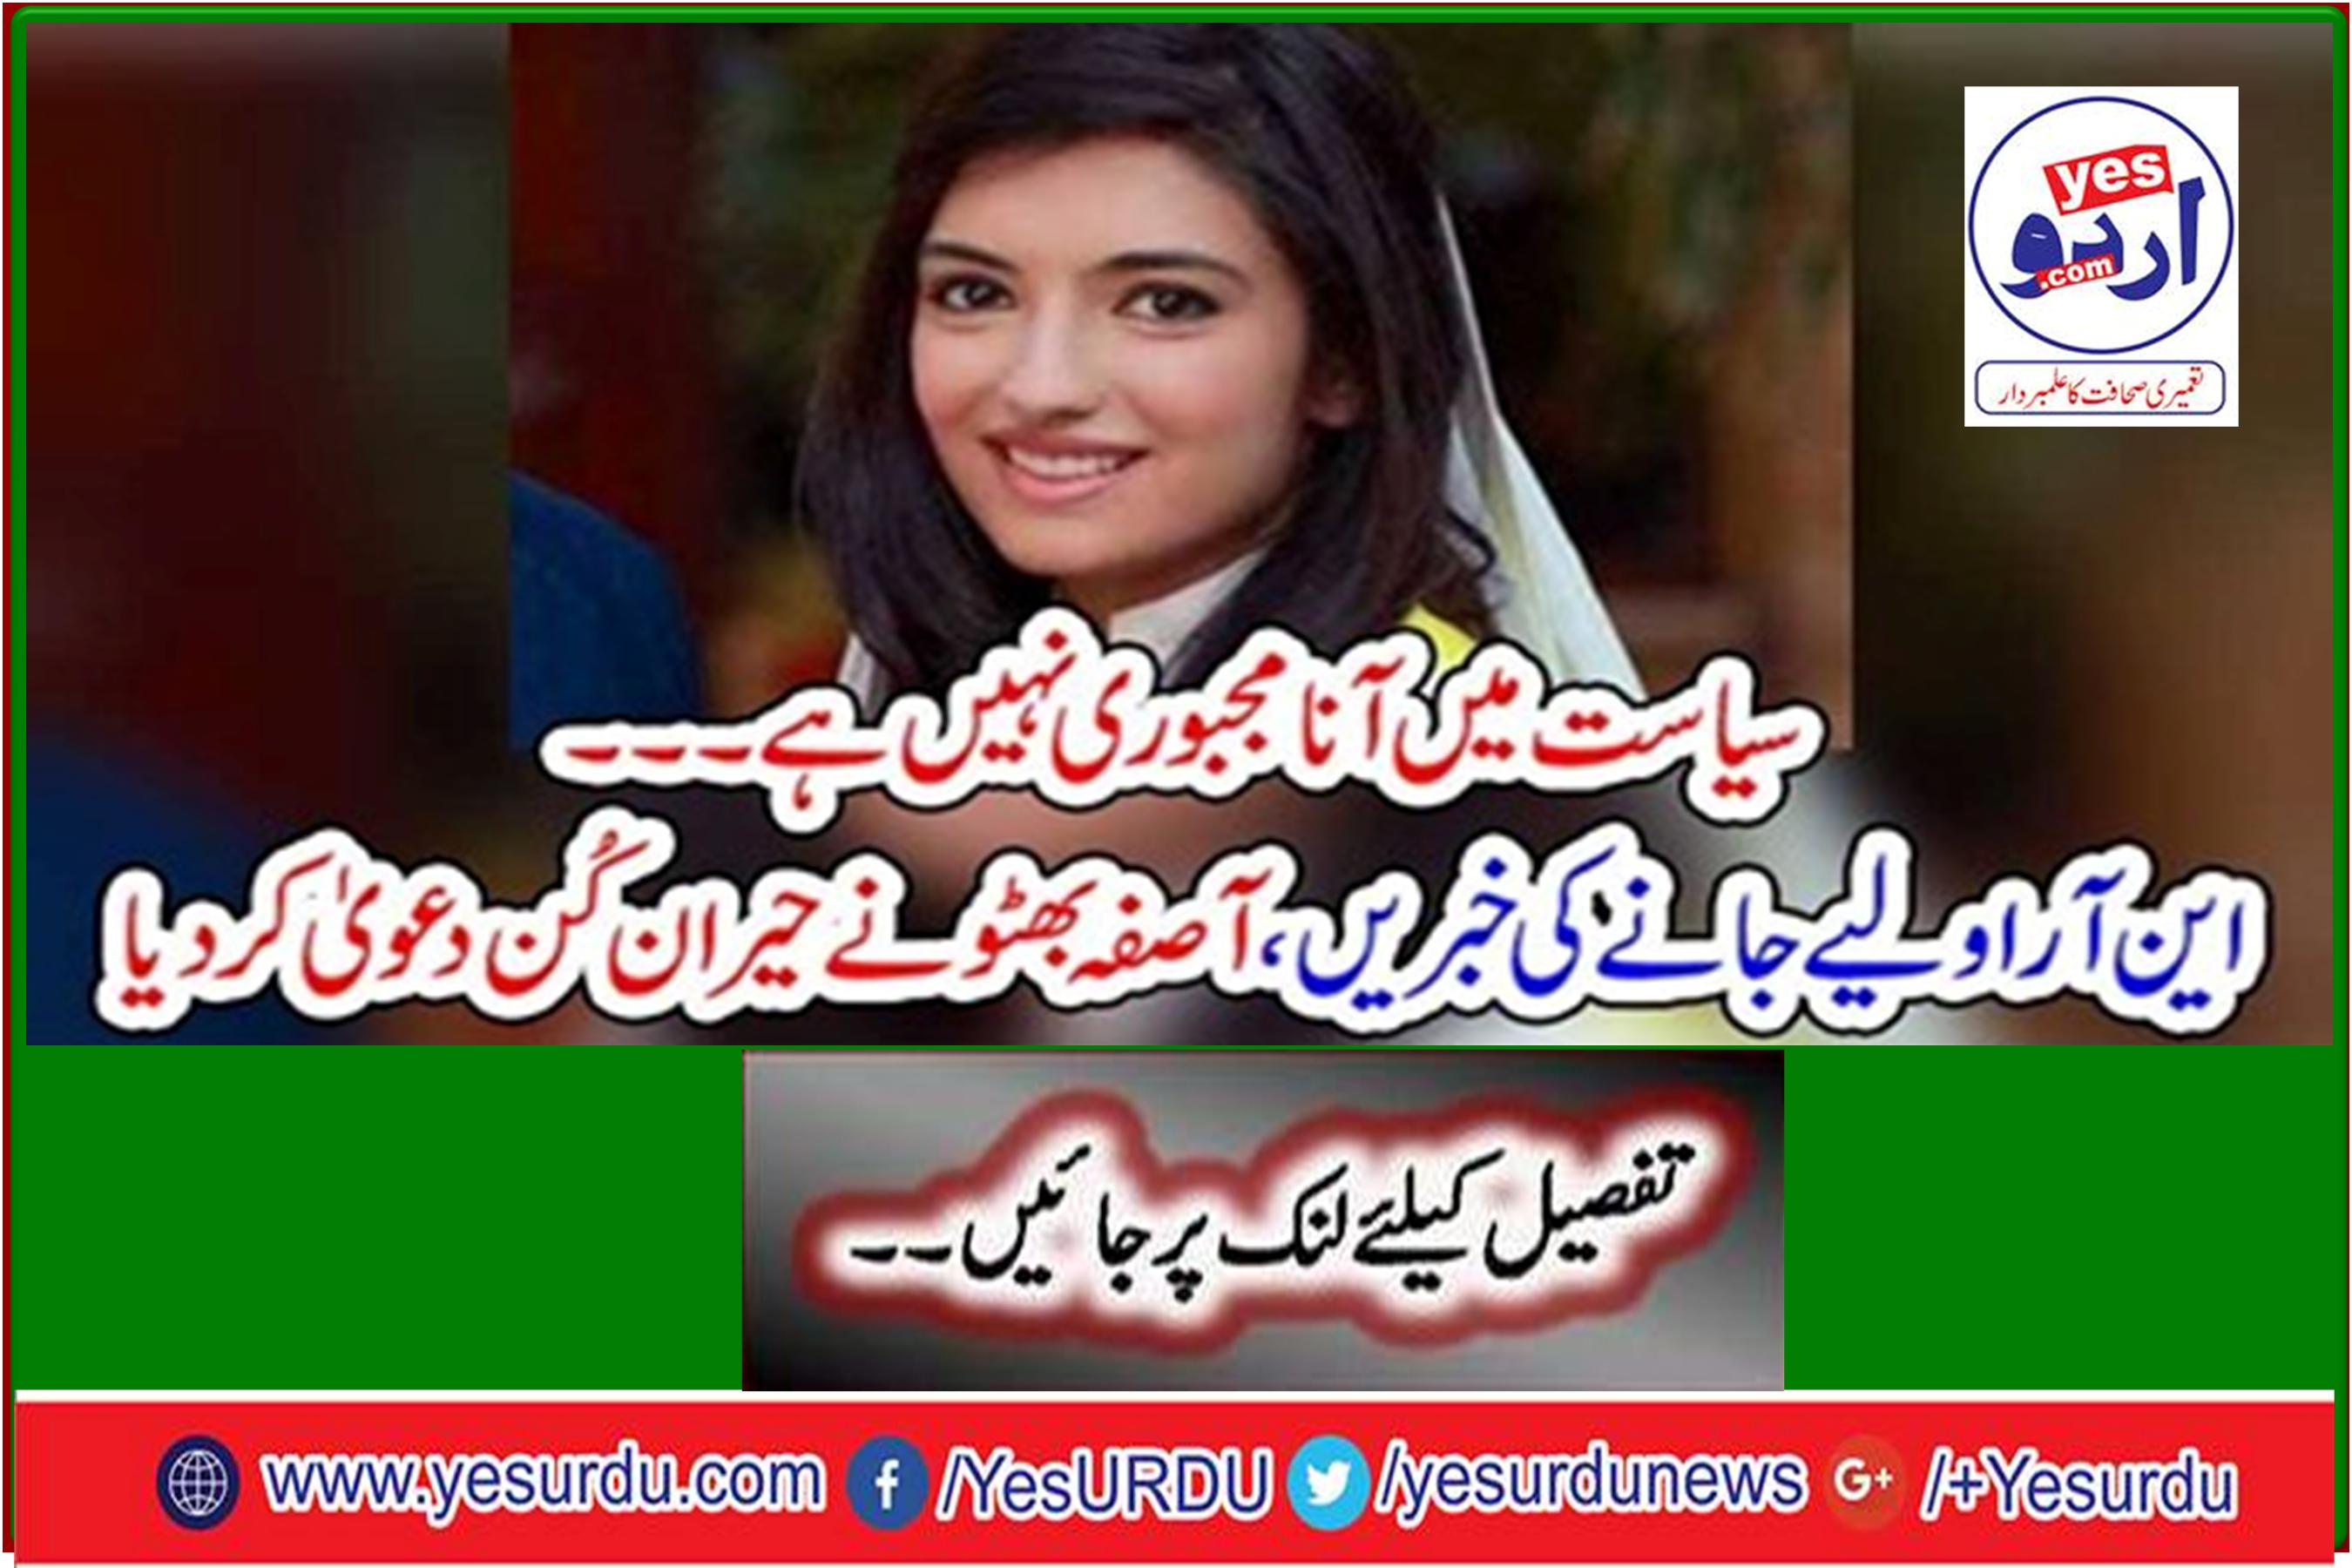 It is not compulsory to come into politics ... News of NRO takeover, Asifa Bhutto made a surprising claim